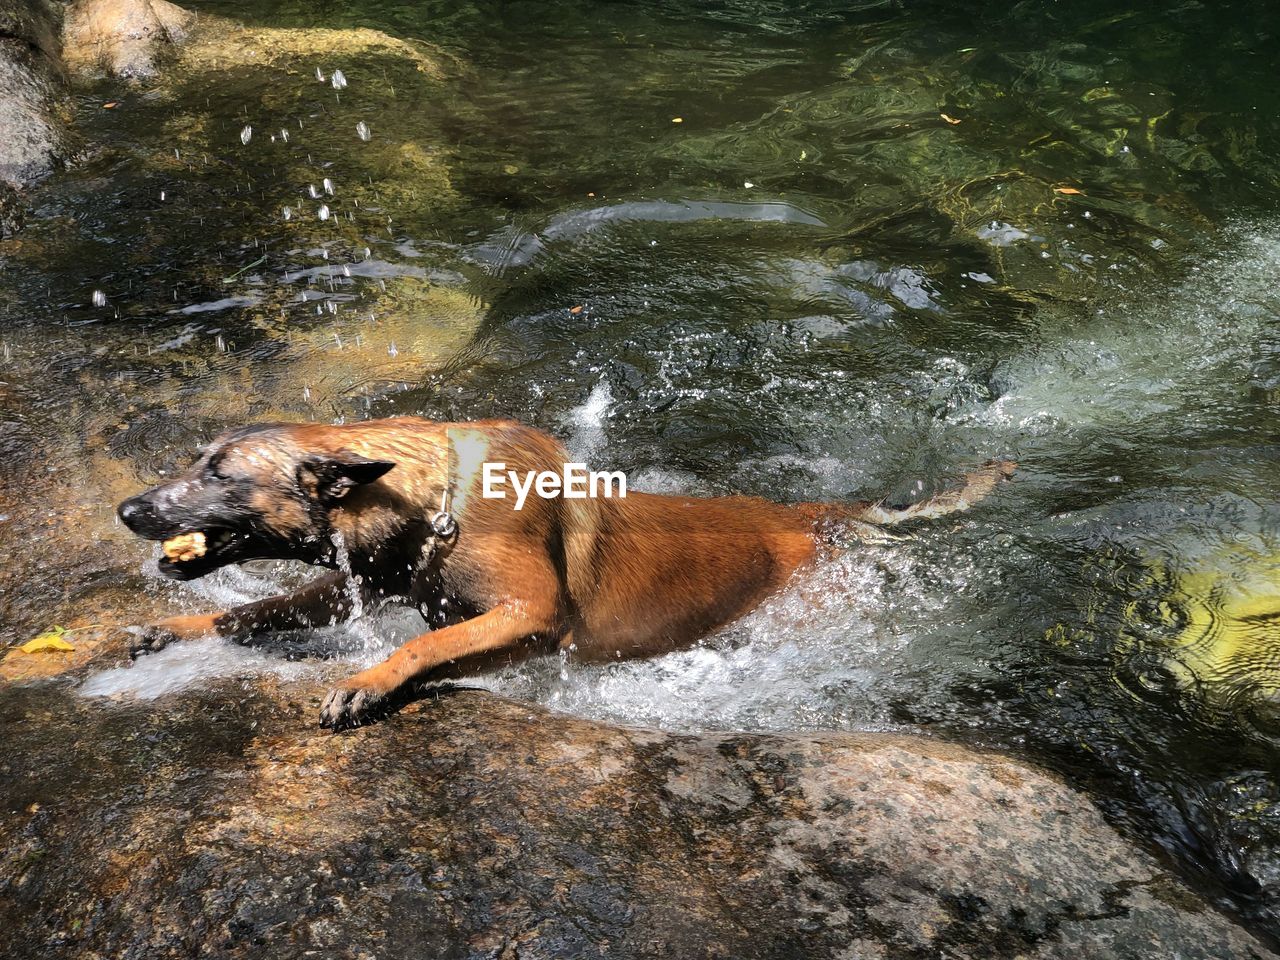 VIEW OF DOG IN RIVER